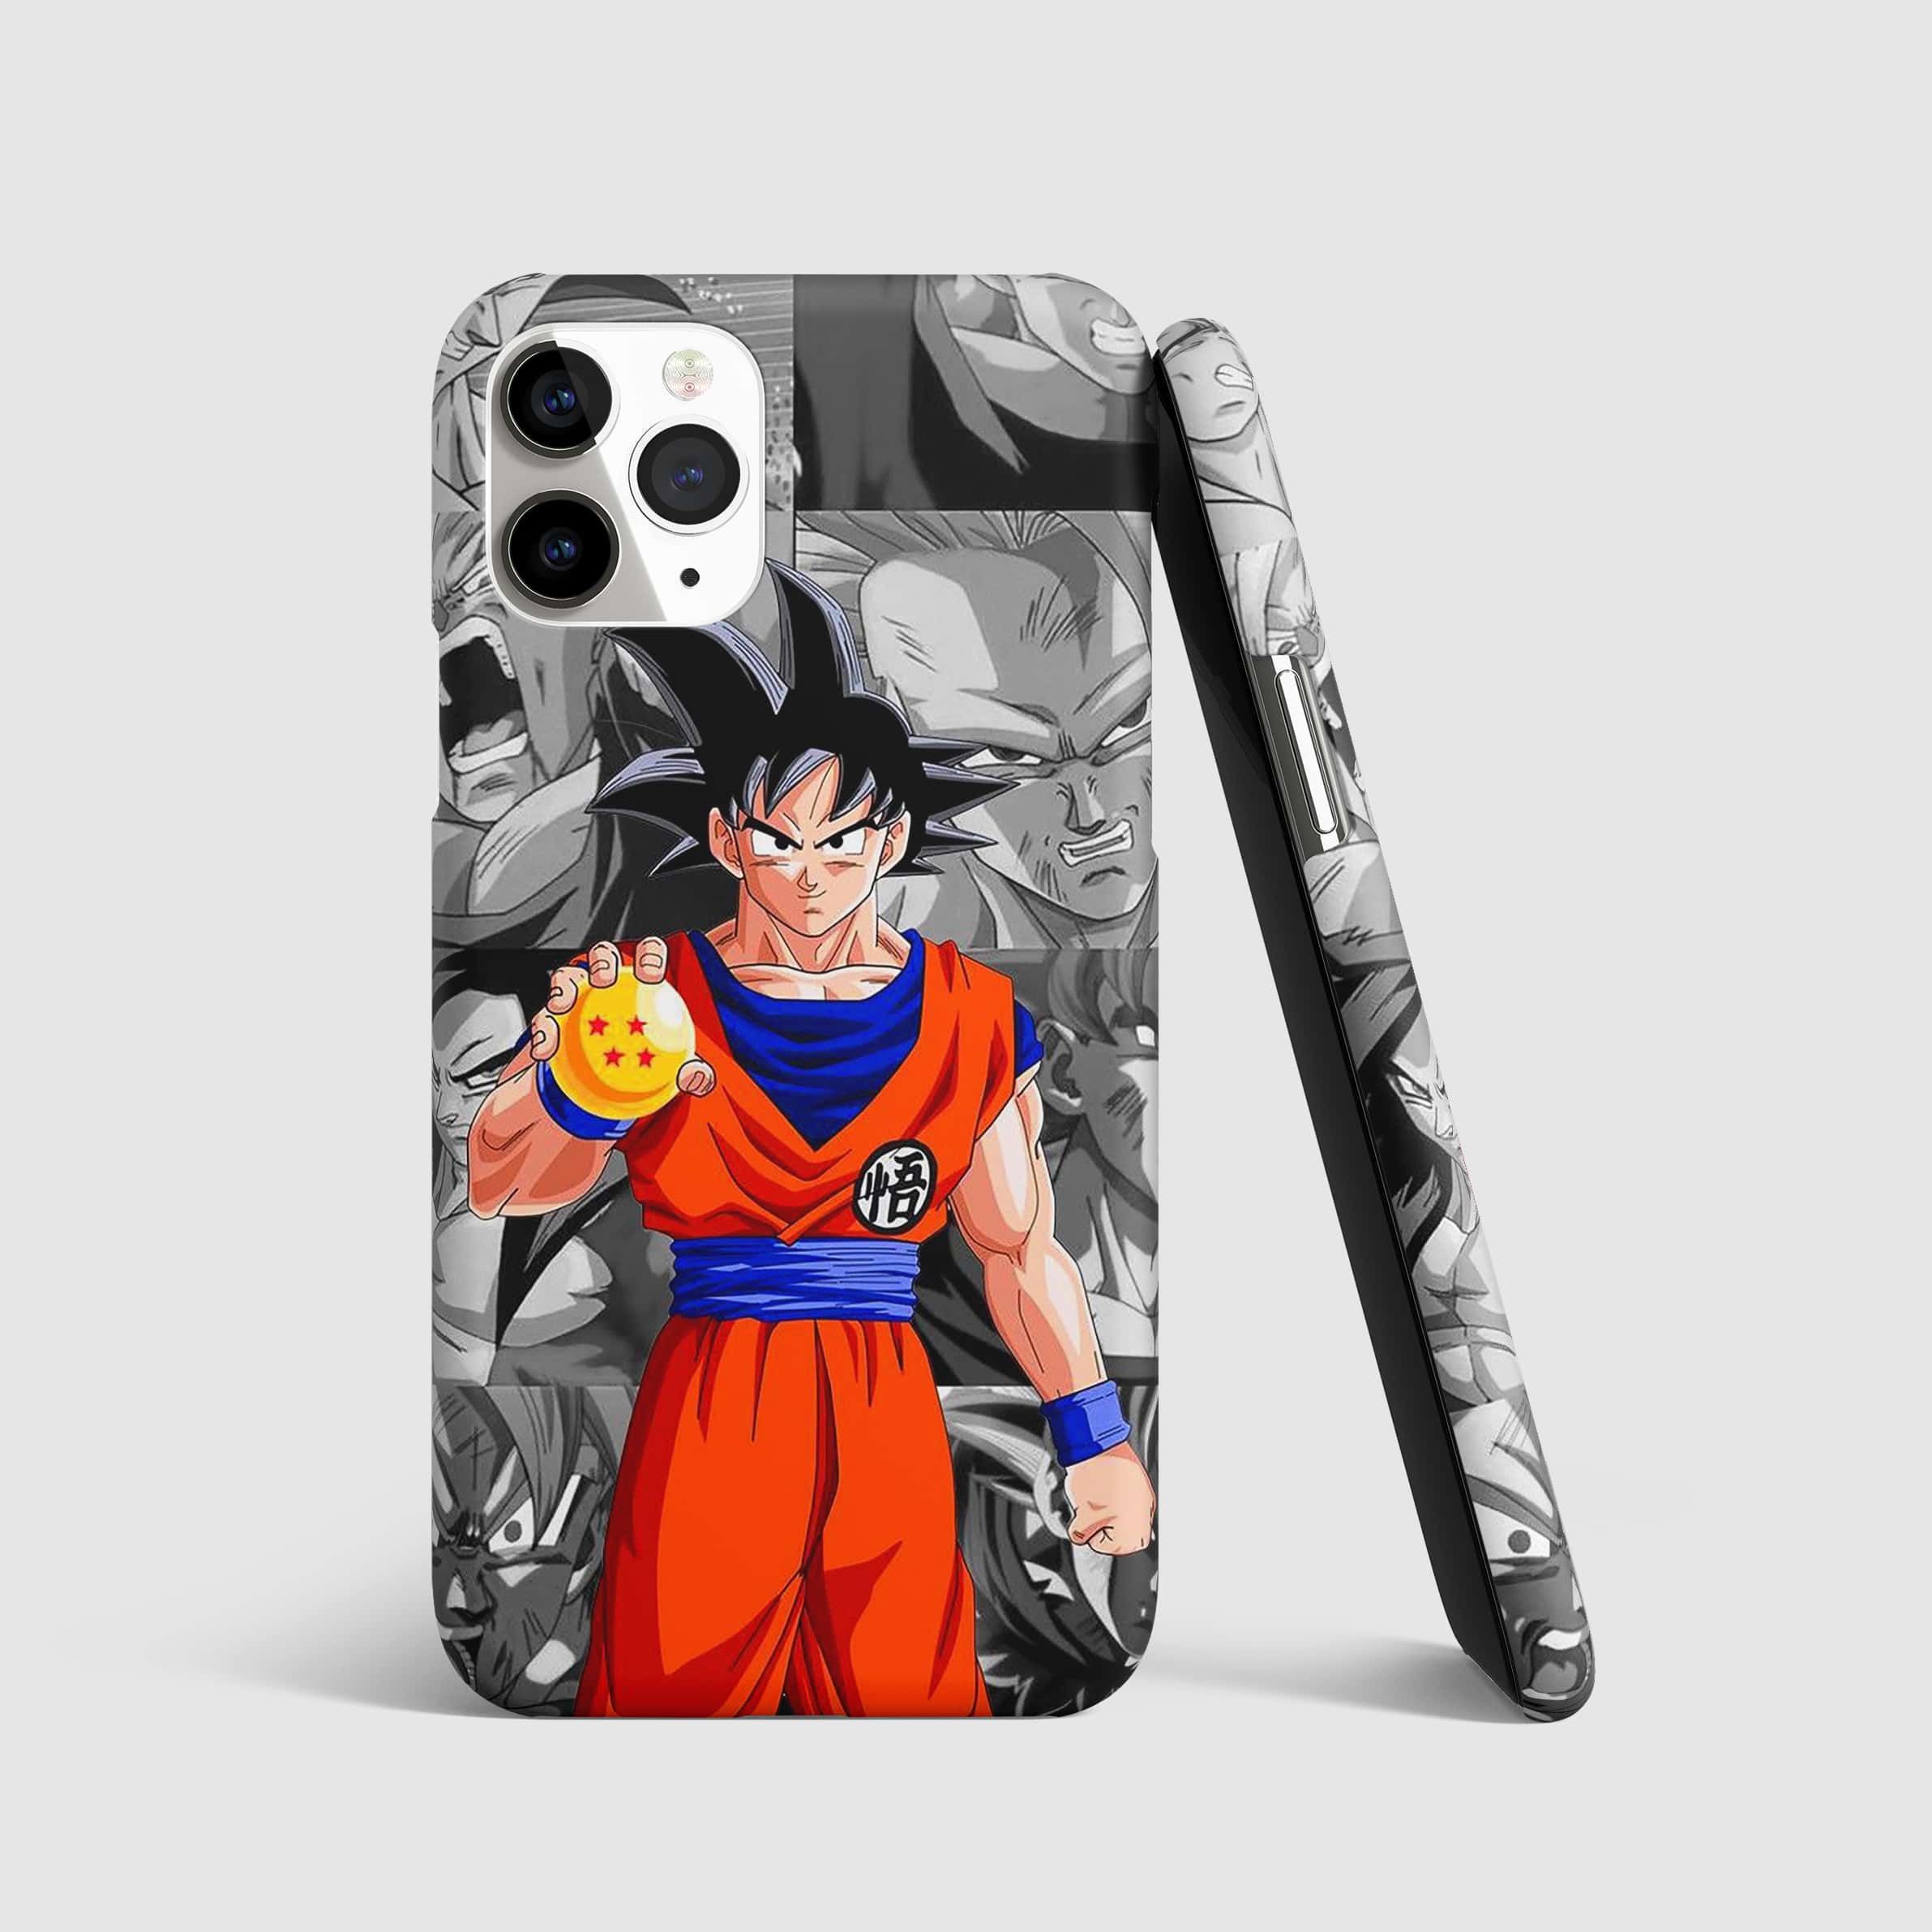 Goku with Dragon Balls depicted on vibrant phone cover.